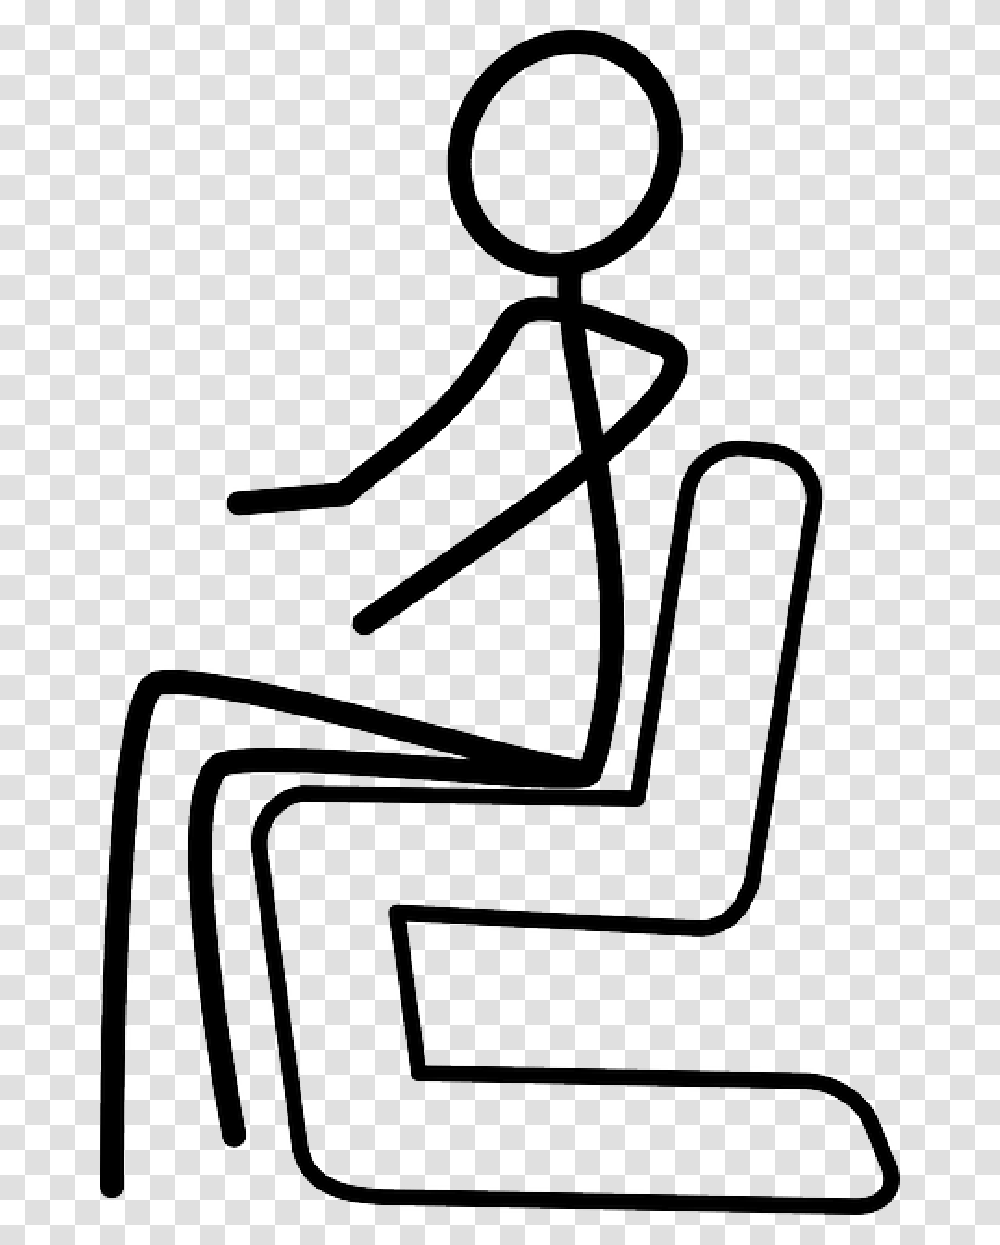 Computer Stick Outline People Man Figure Sleeping Stick Figure Sitting Down, Chair, Furniture Transparent Png